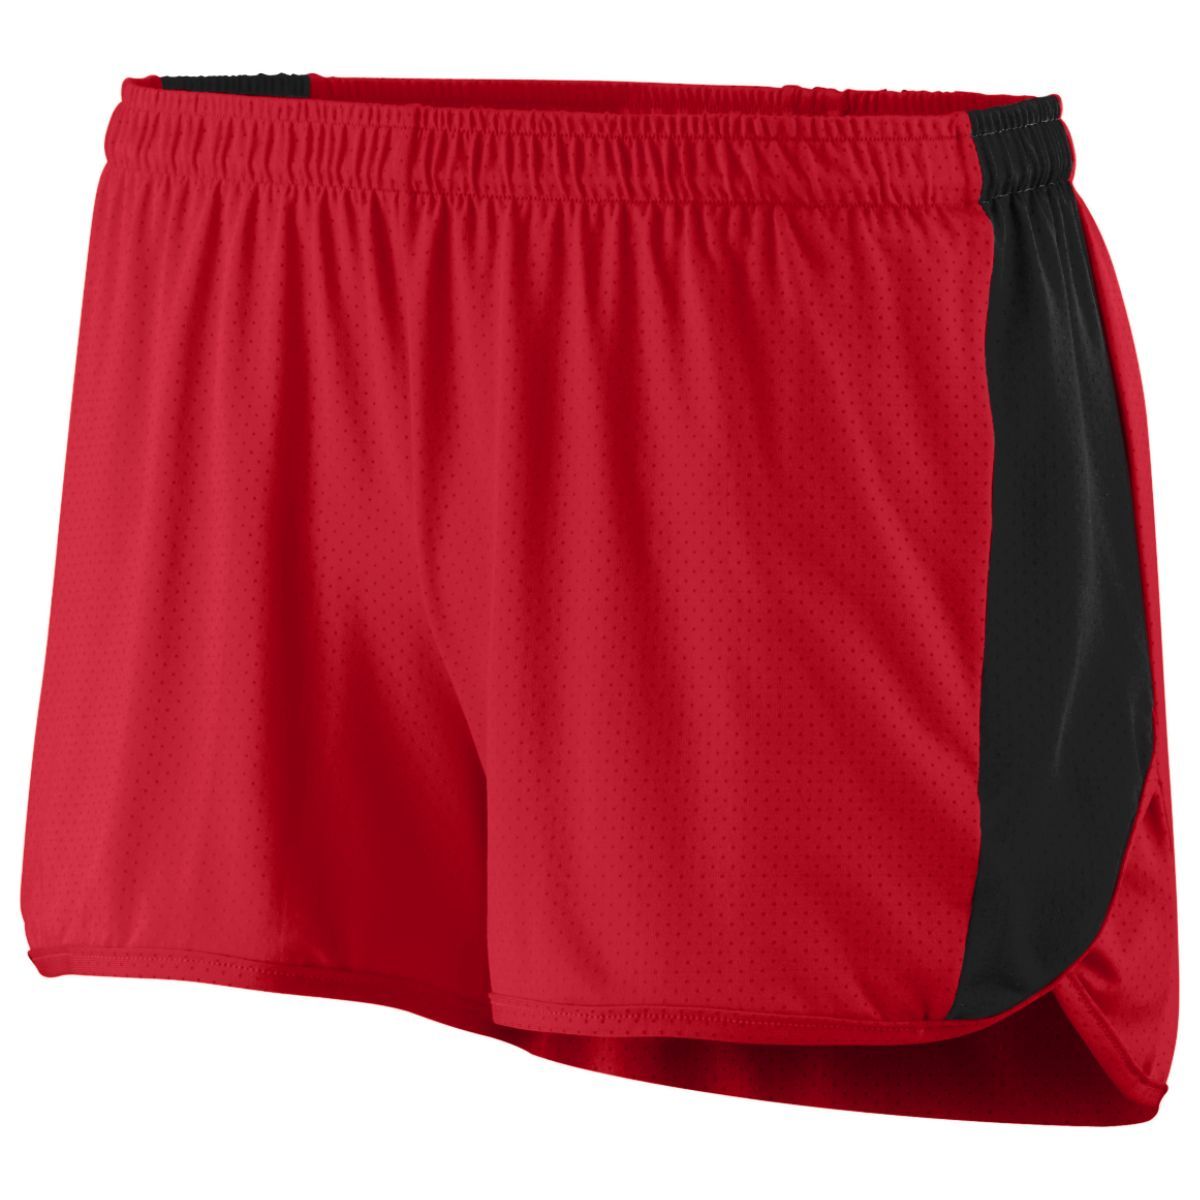 Augusta Sportswear Ladies Sprint Shorts in Red/Black  -Part of the Ladies, Ladies-Shorts, Augusta-Products, Track-Field product lines at KanaleyCreations.com